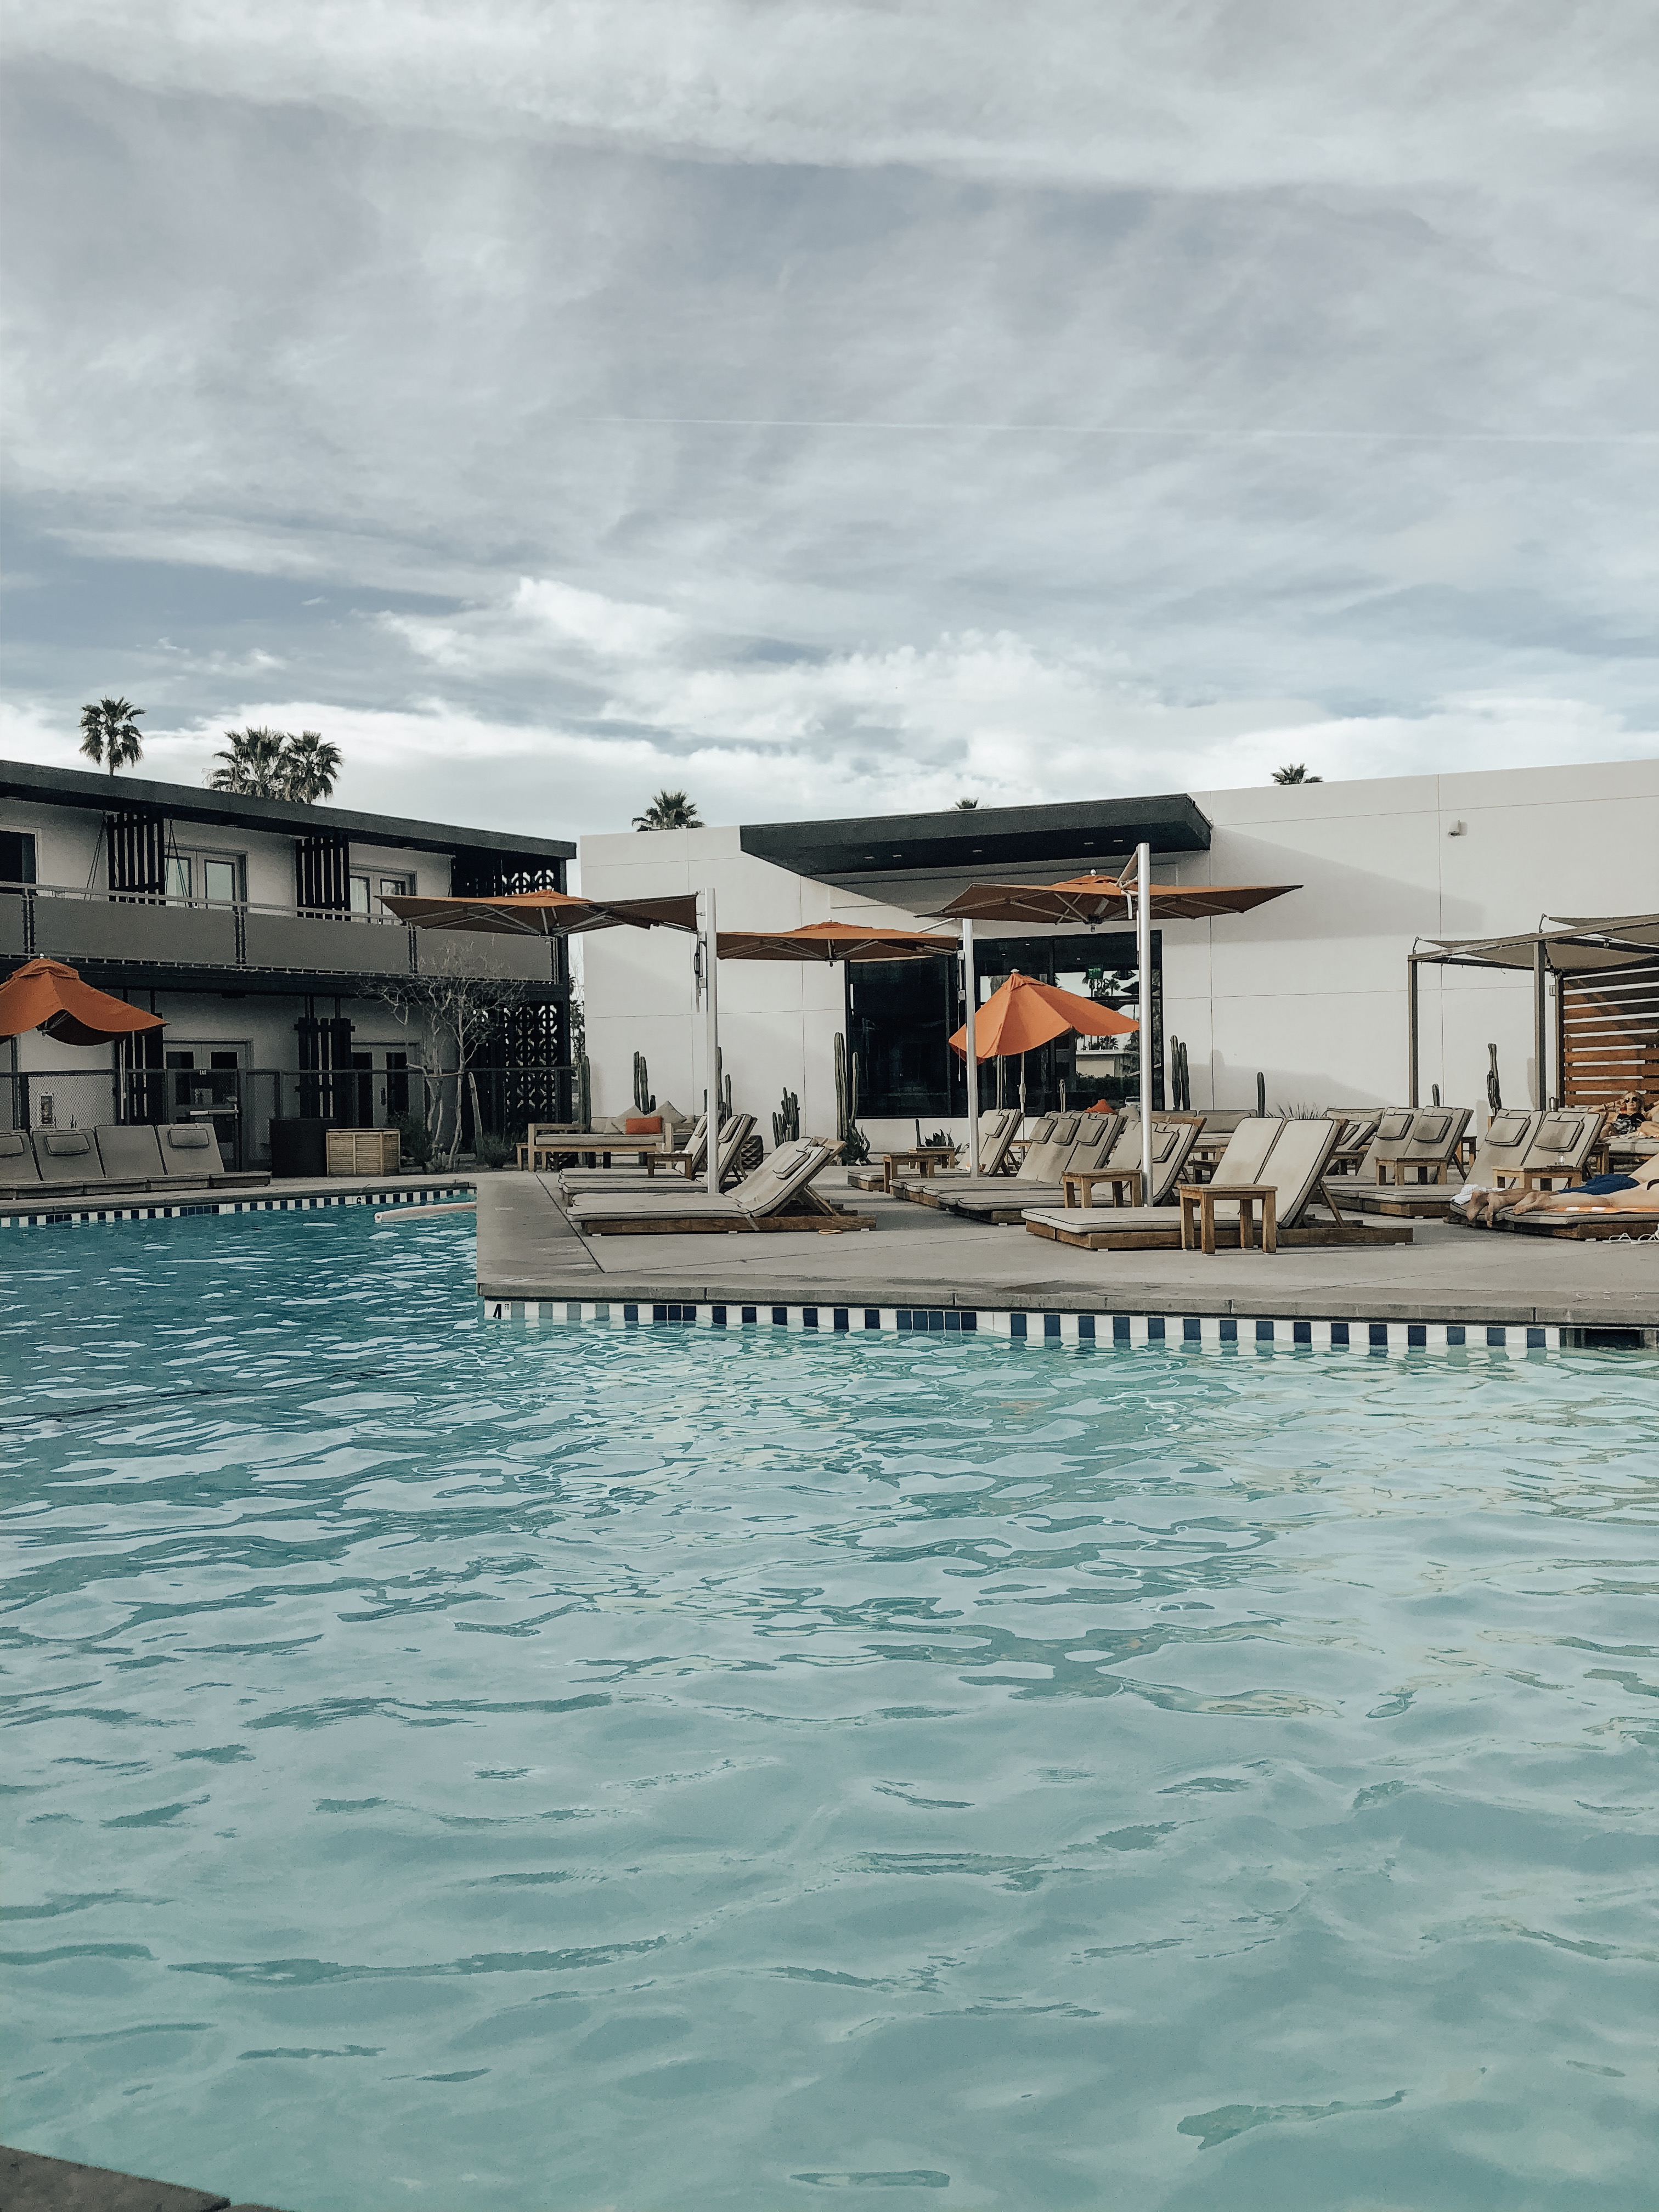 SPRING BREAK GETAWAY TO PALM SPRINGS- Jaclyn De Leon Style + Looking for an easy mini vacation somewhere warm? Palm Springs has the best boutique hotels with plenty of fun at the pool, good restaurants to eat at and warm weather.